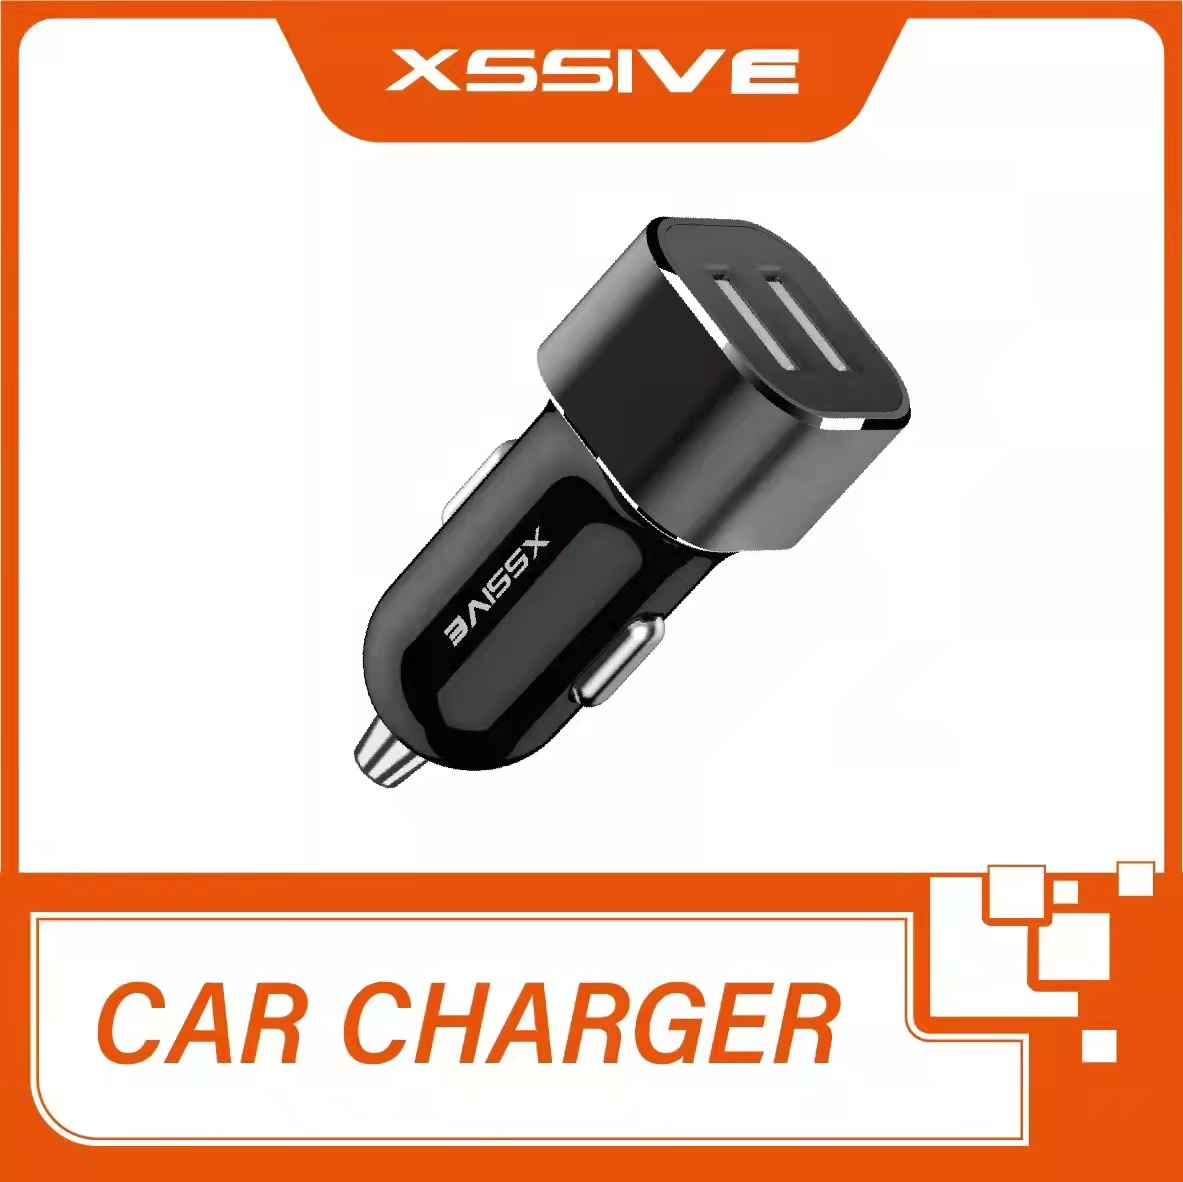 Xssive - Car Charger